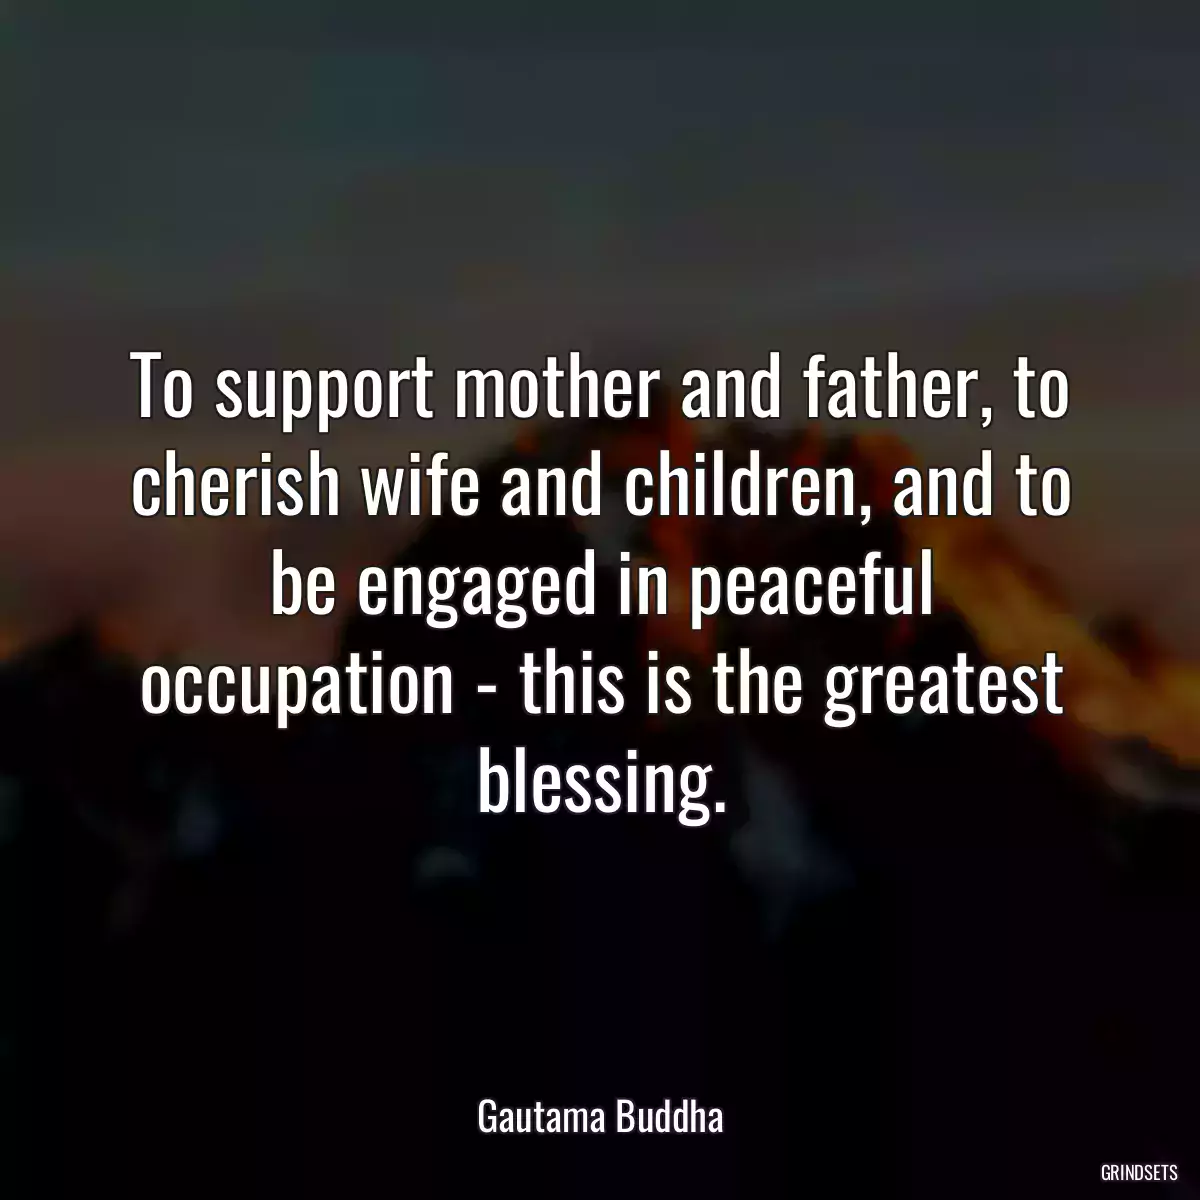 To support mother and father, to cherish wife and children, and to be engaged in peaceful occupation - this is the greatest blessing.